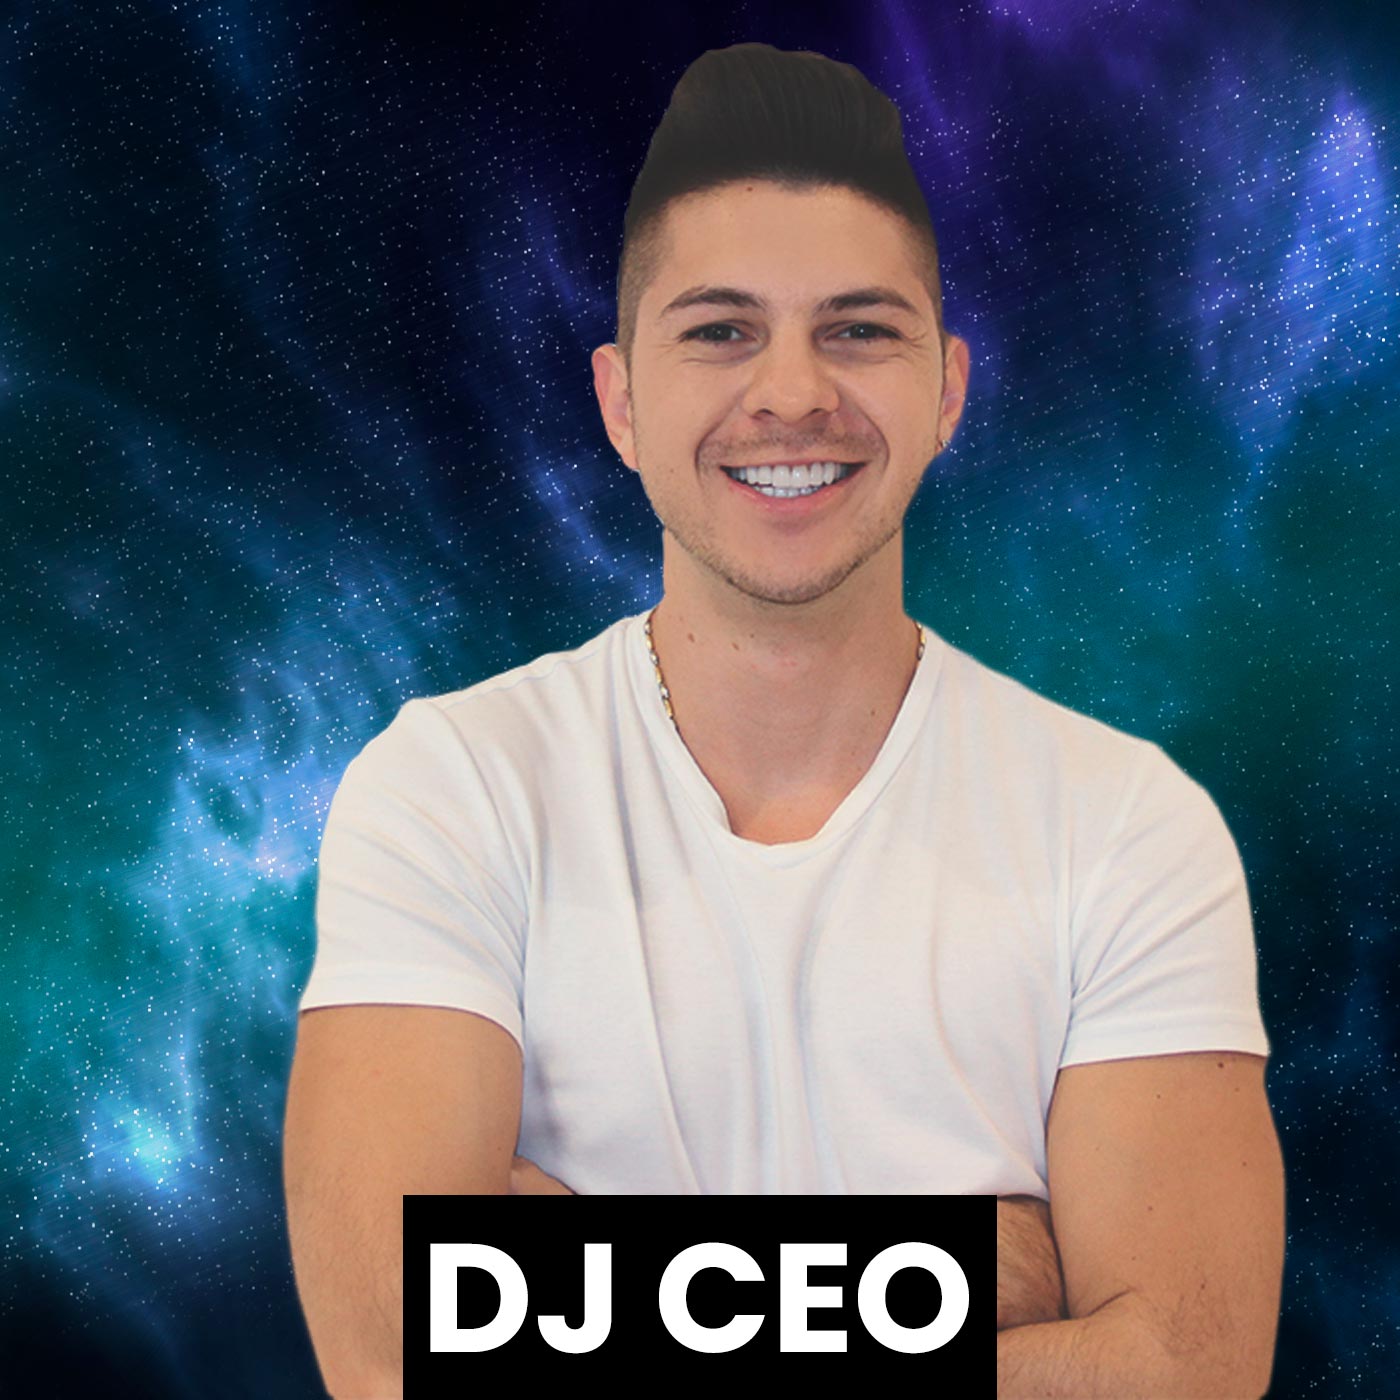 Dj - CEO Andres More